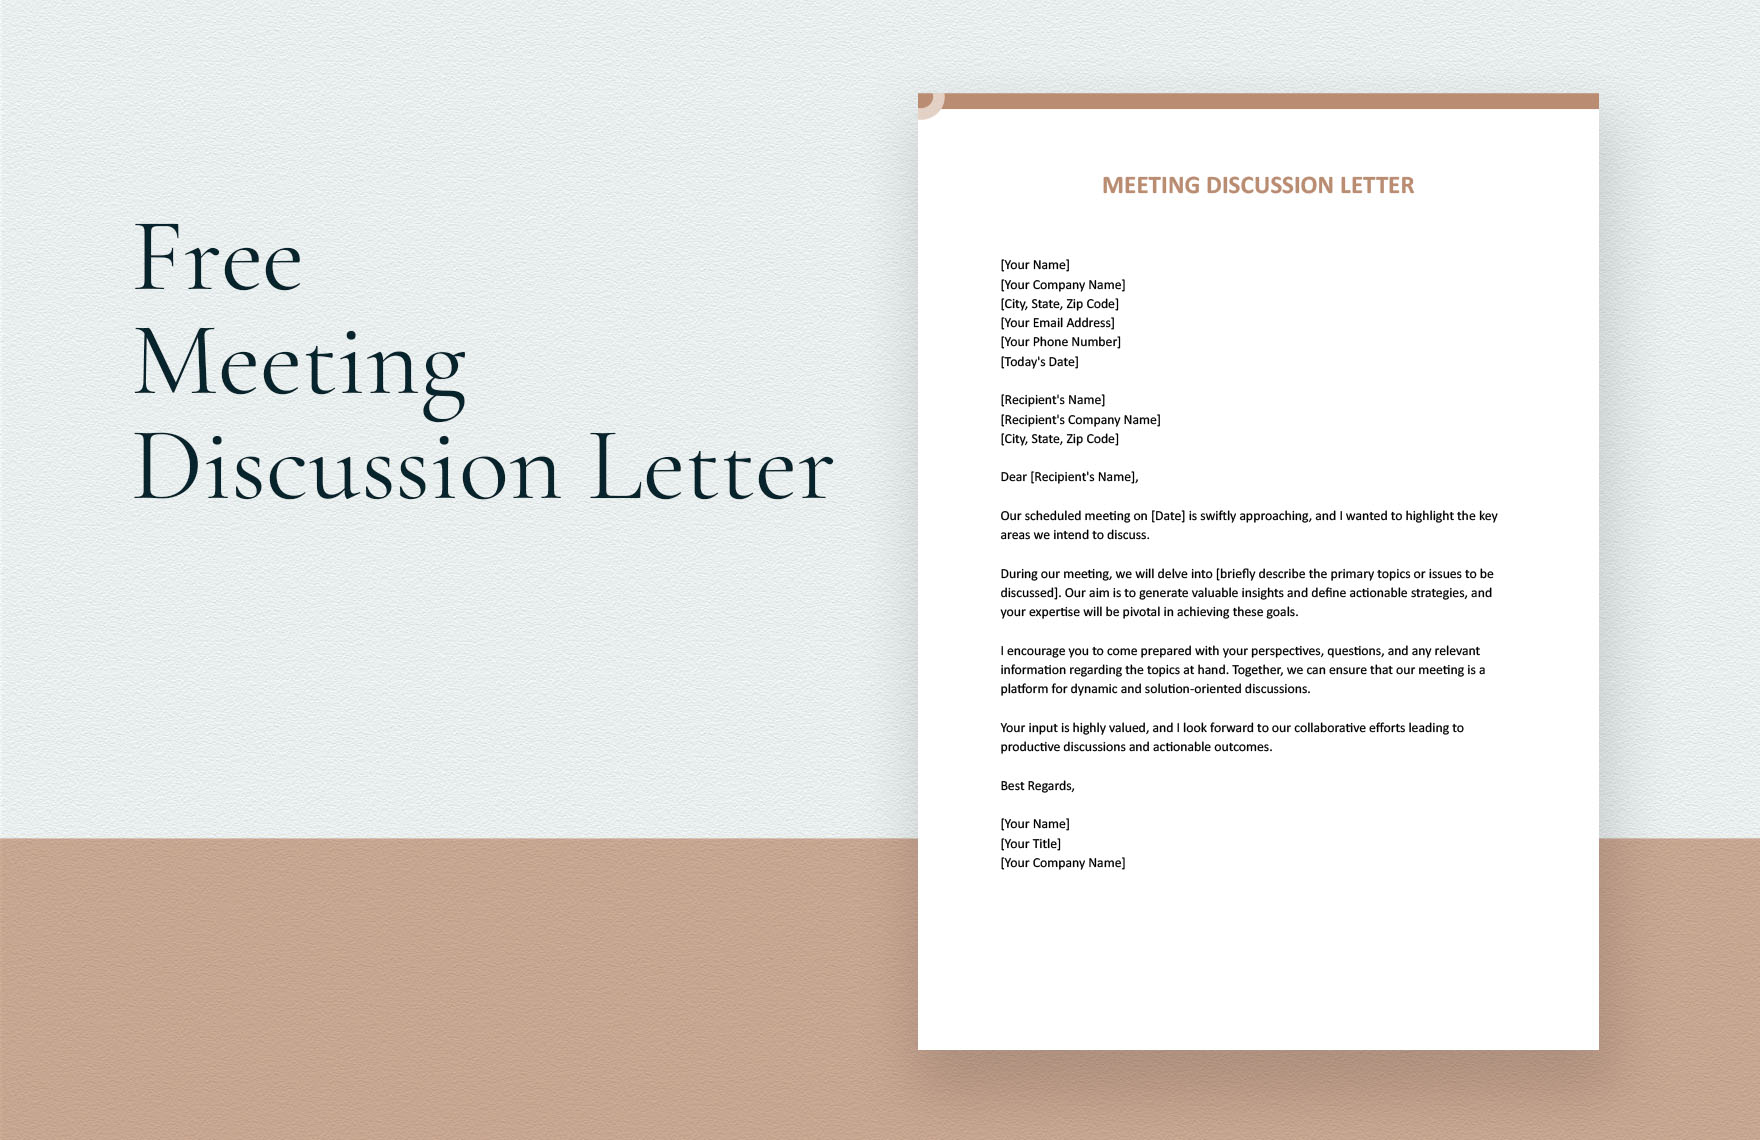 Free Meeting Discussion Letter